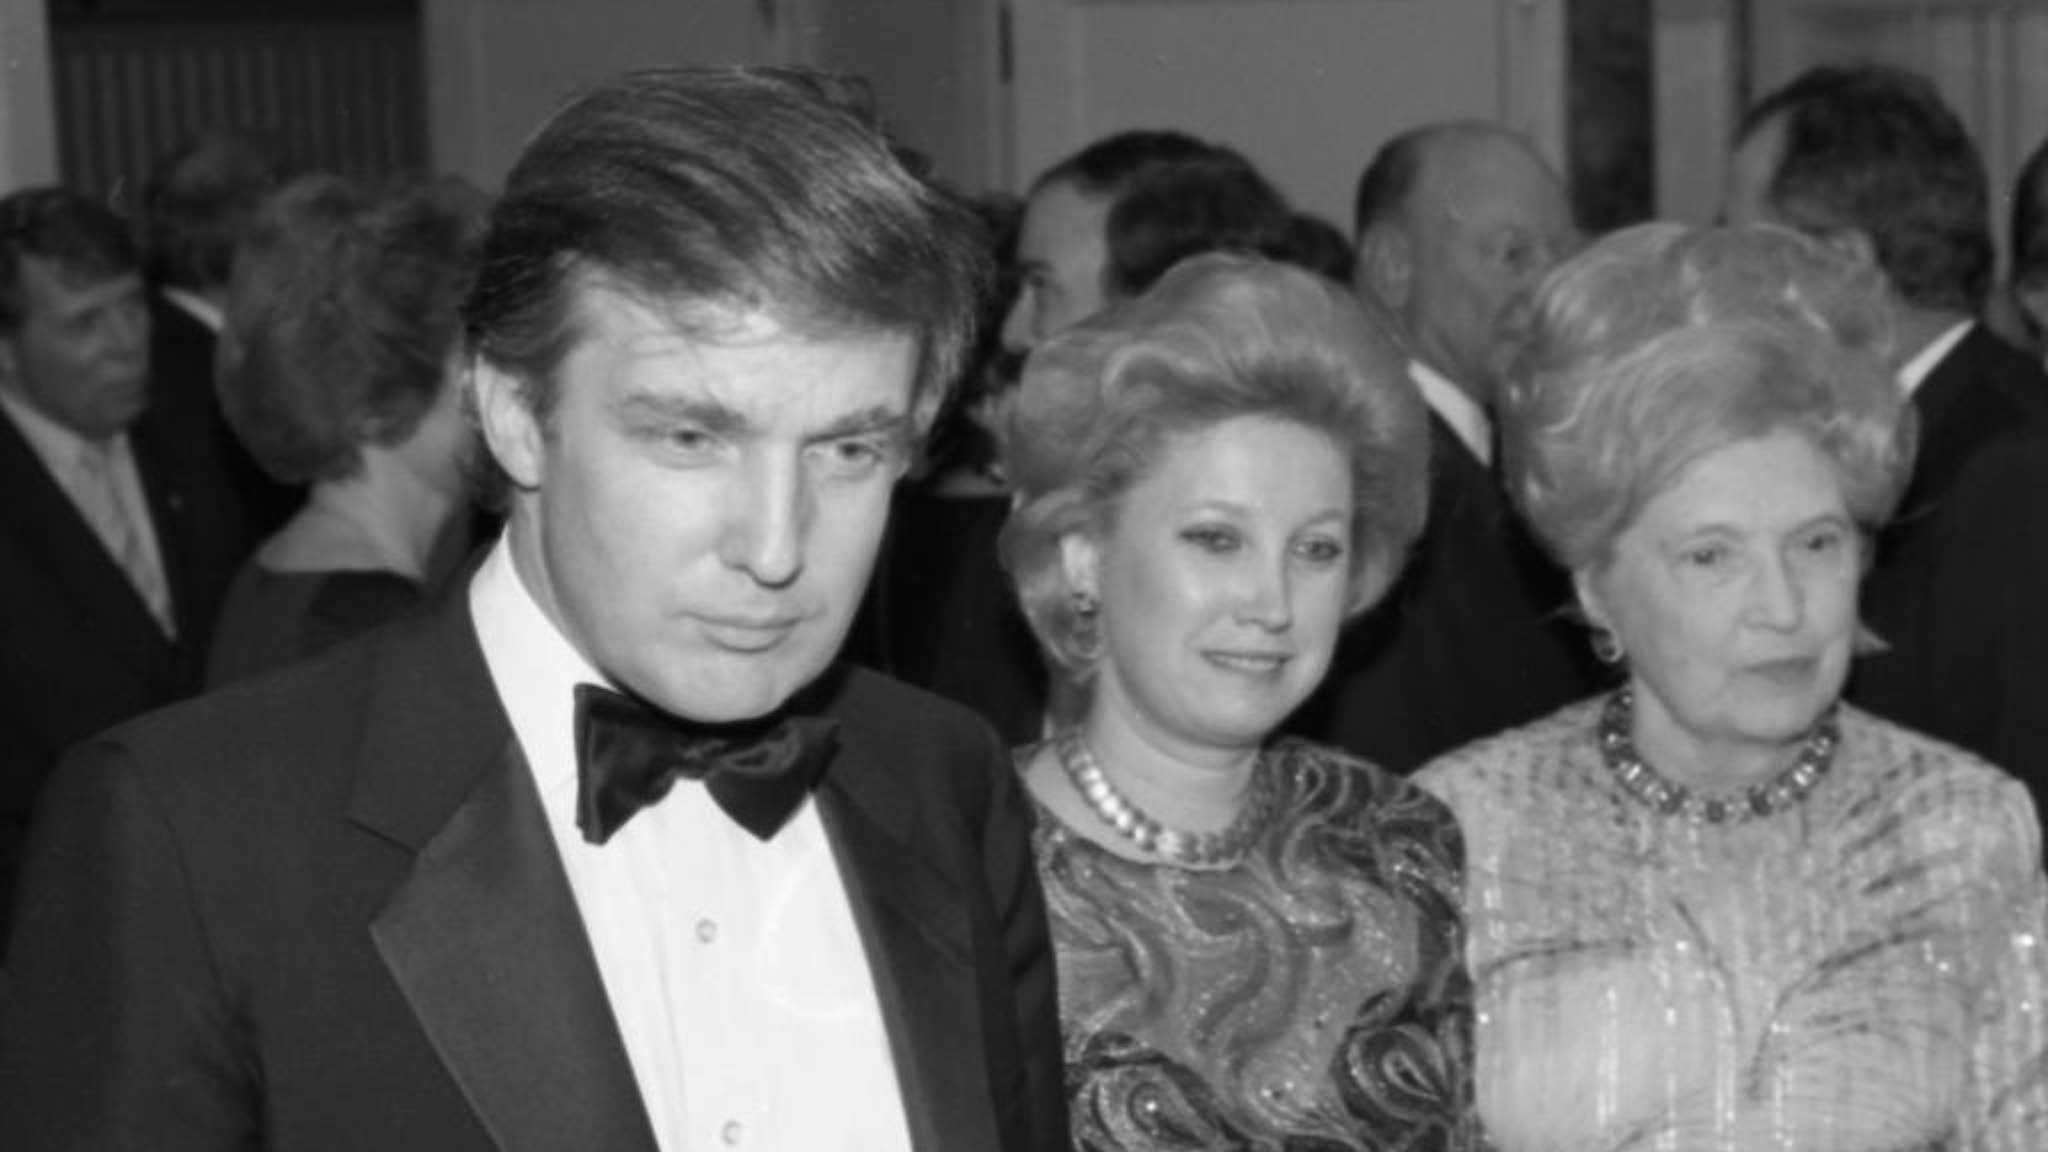 Businessman Donald Trump, his sister Maryanne Trump Barry and his mother Mary Anne MacLeod Trump attend the 90th birrthday celebration of Dr. Norman Vincent Peale author of the book "The Power of Positive Thinking" at the Waldorf Astoria Hotel in May 1988 in New York, New York. (Photo by Tom Gates/Getty Images)